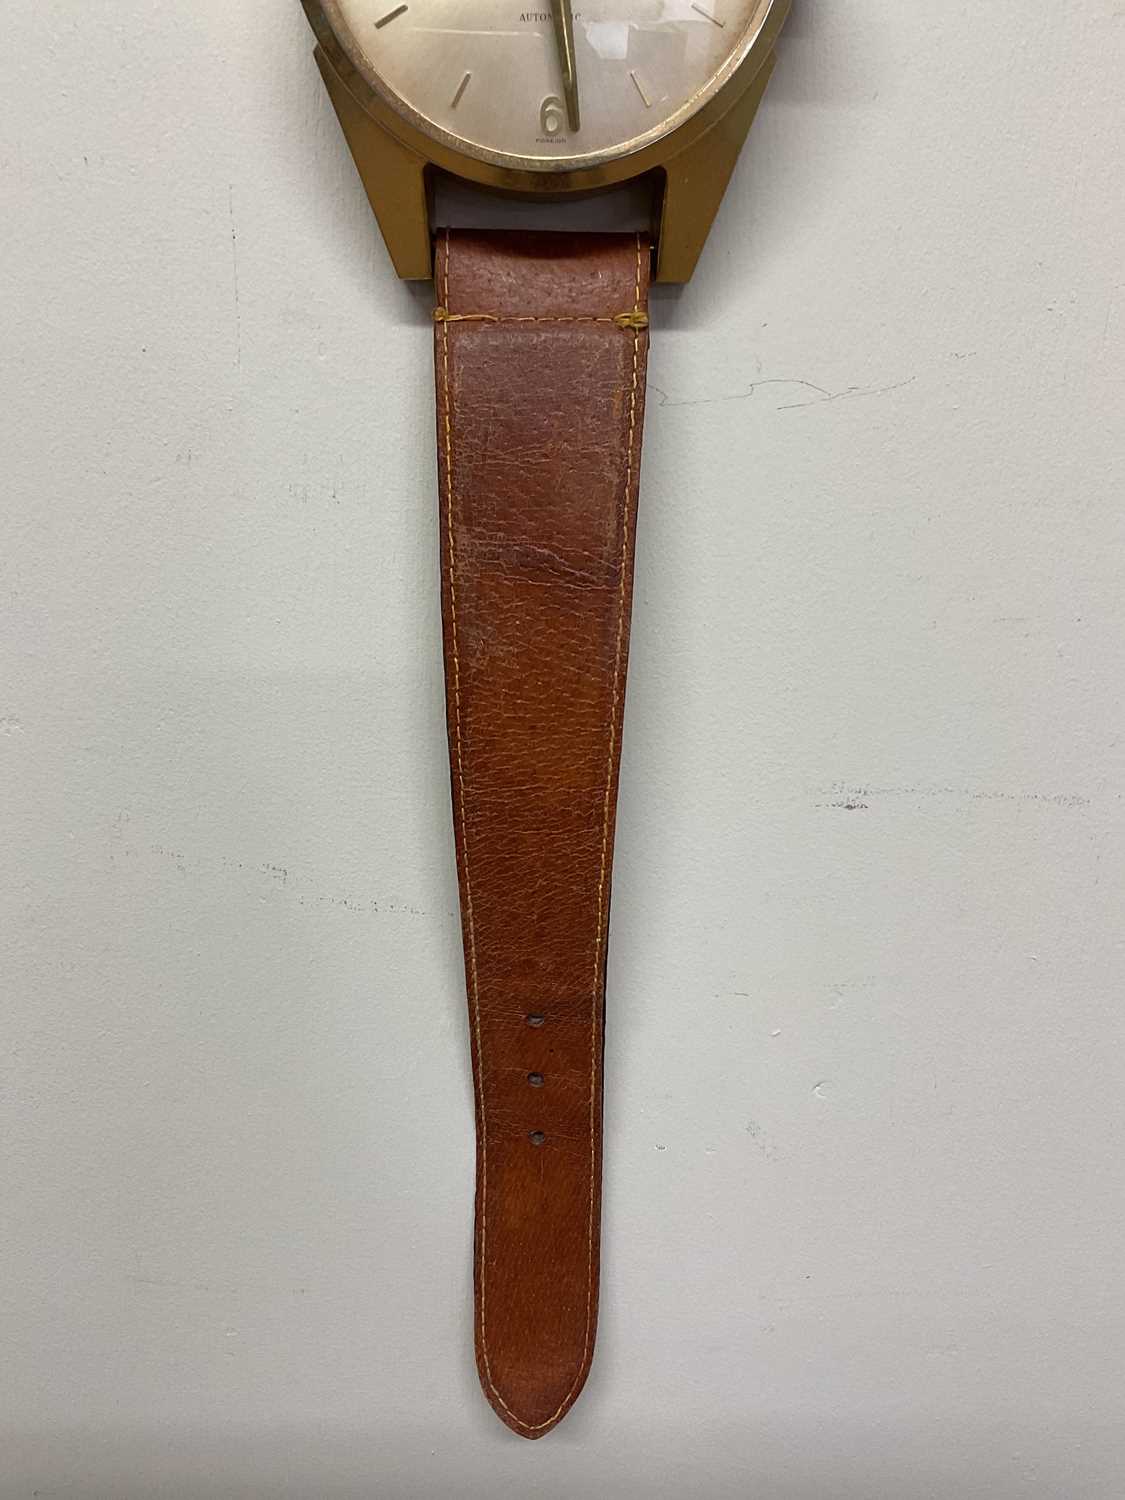 ESTYMA; a wall clock styled as a wristwatch on leather strap, height 78cm, width 12cm - Image 3 of 5